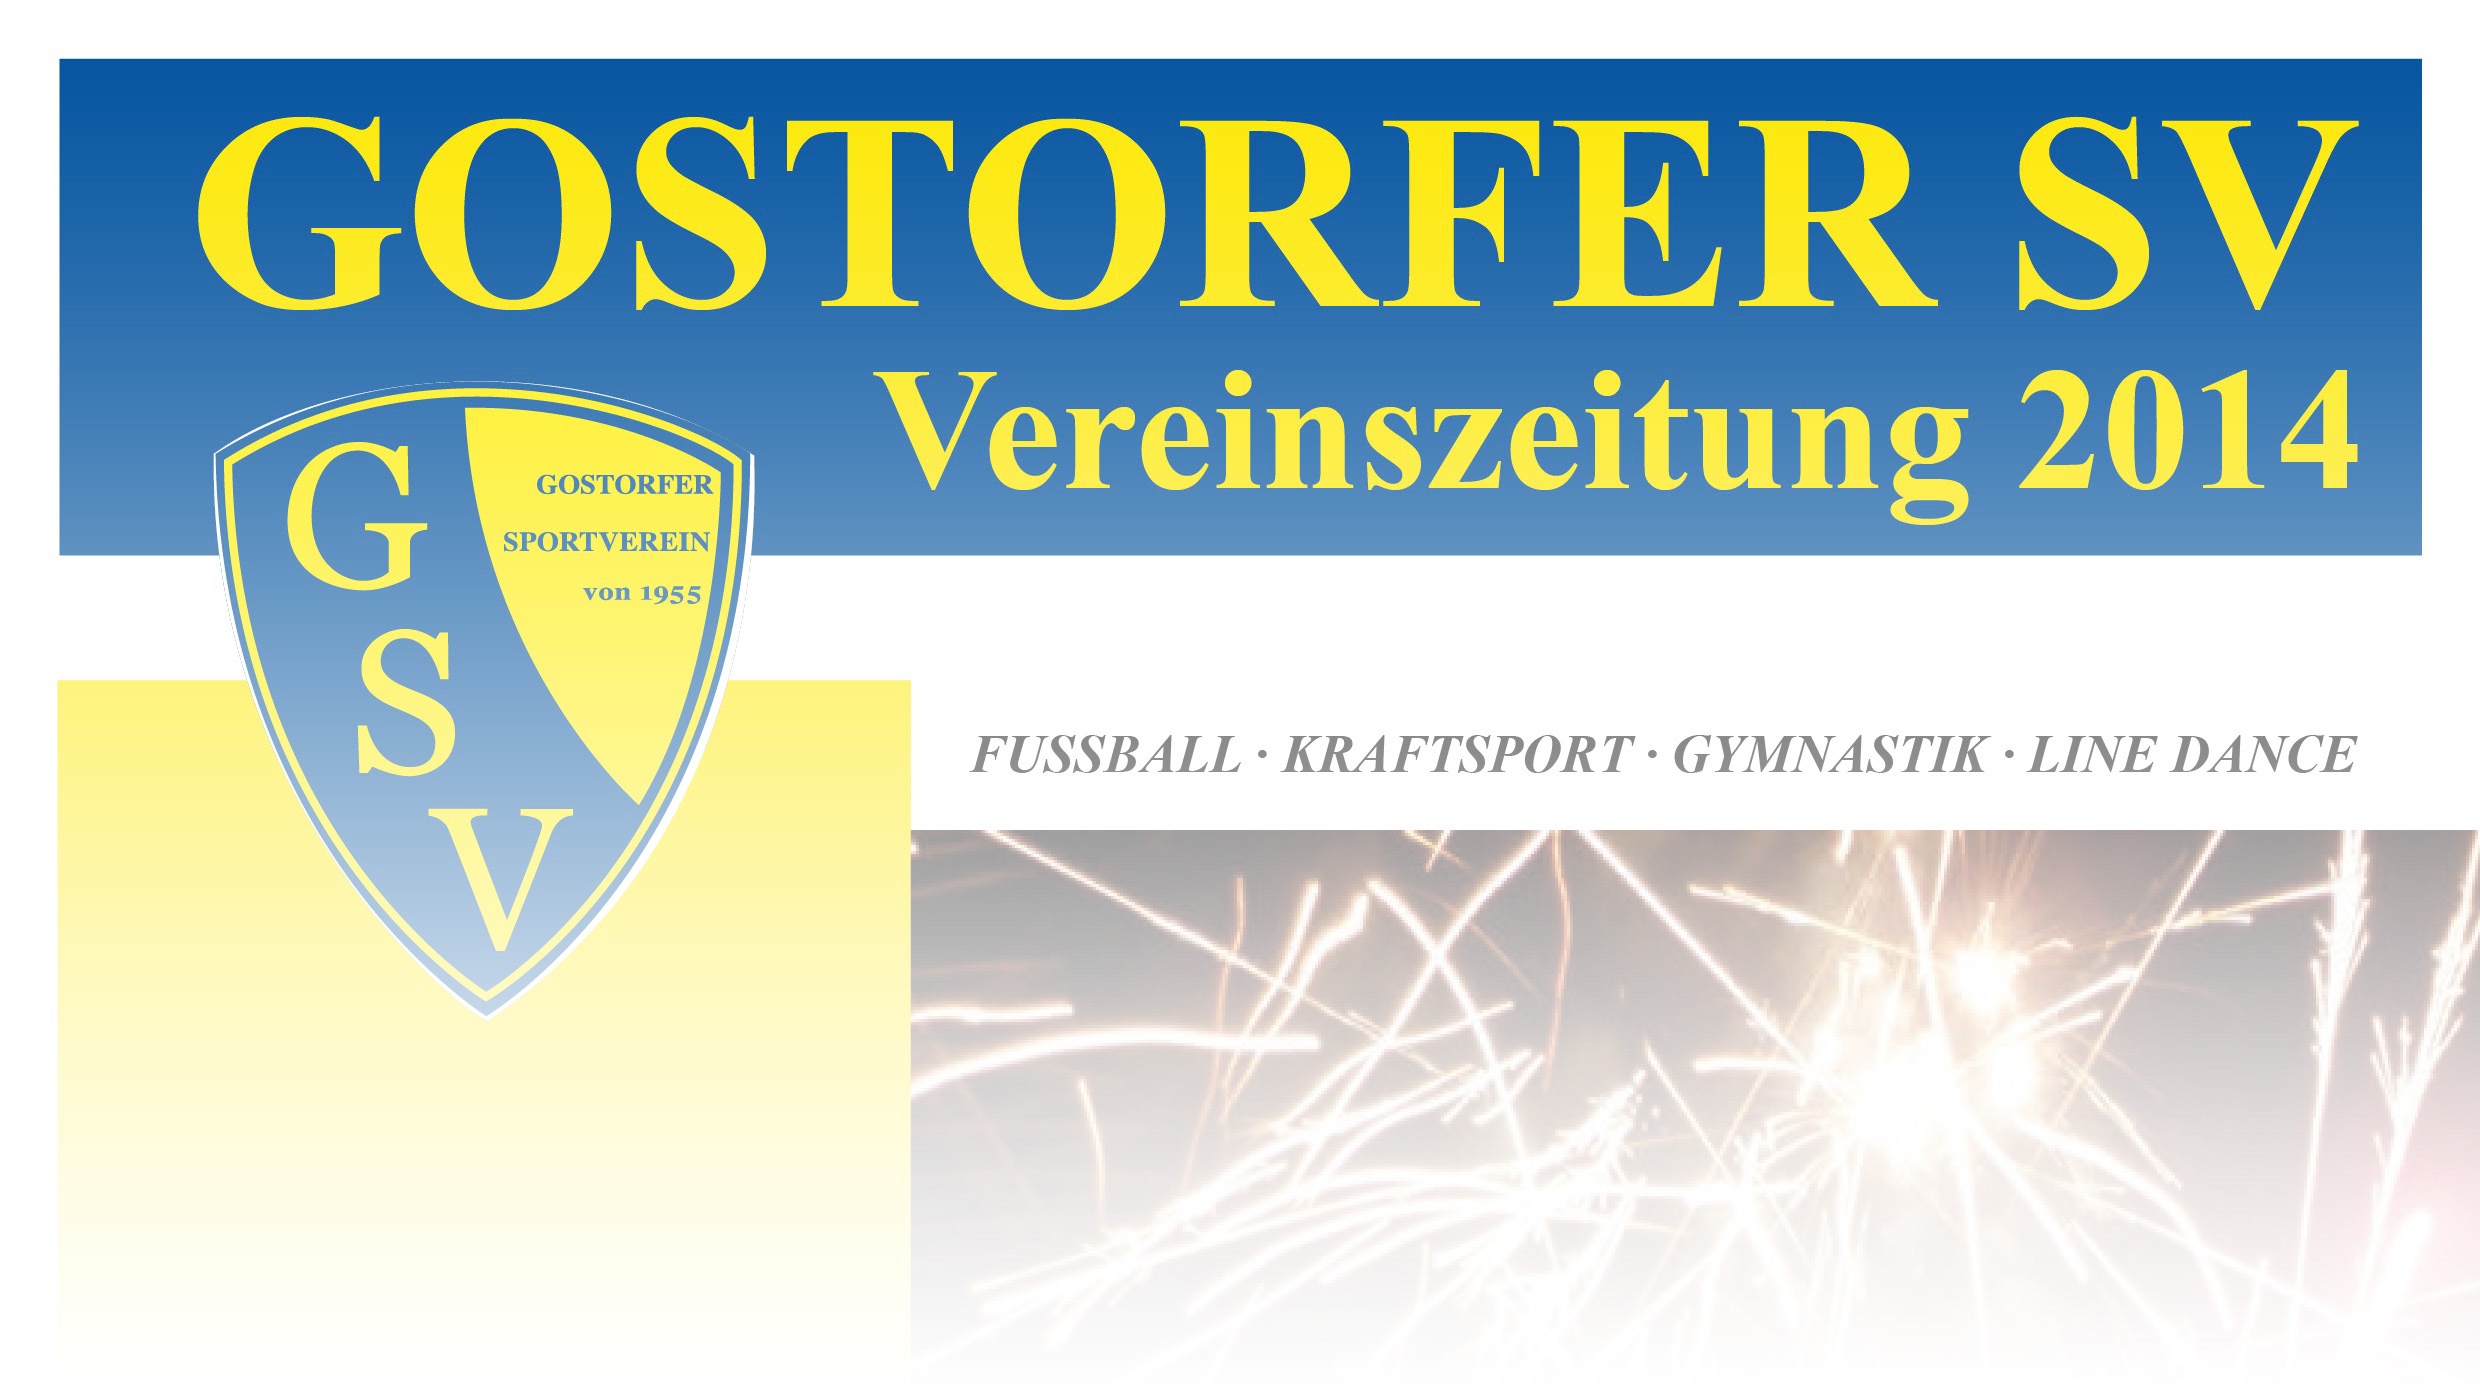 You are currently viewing Vereinszeitung 2014